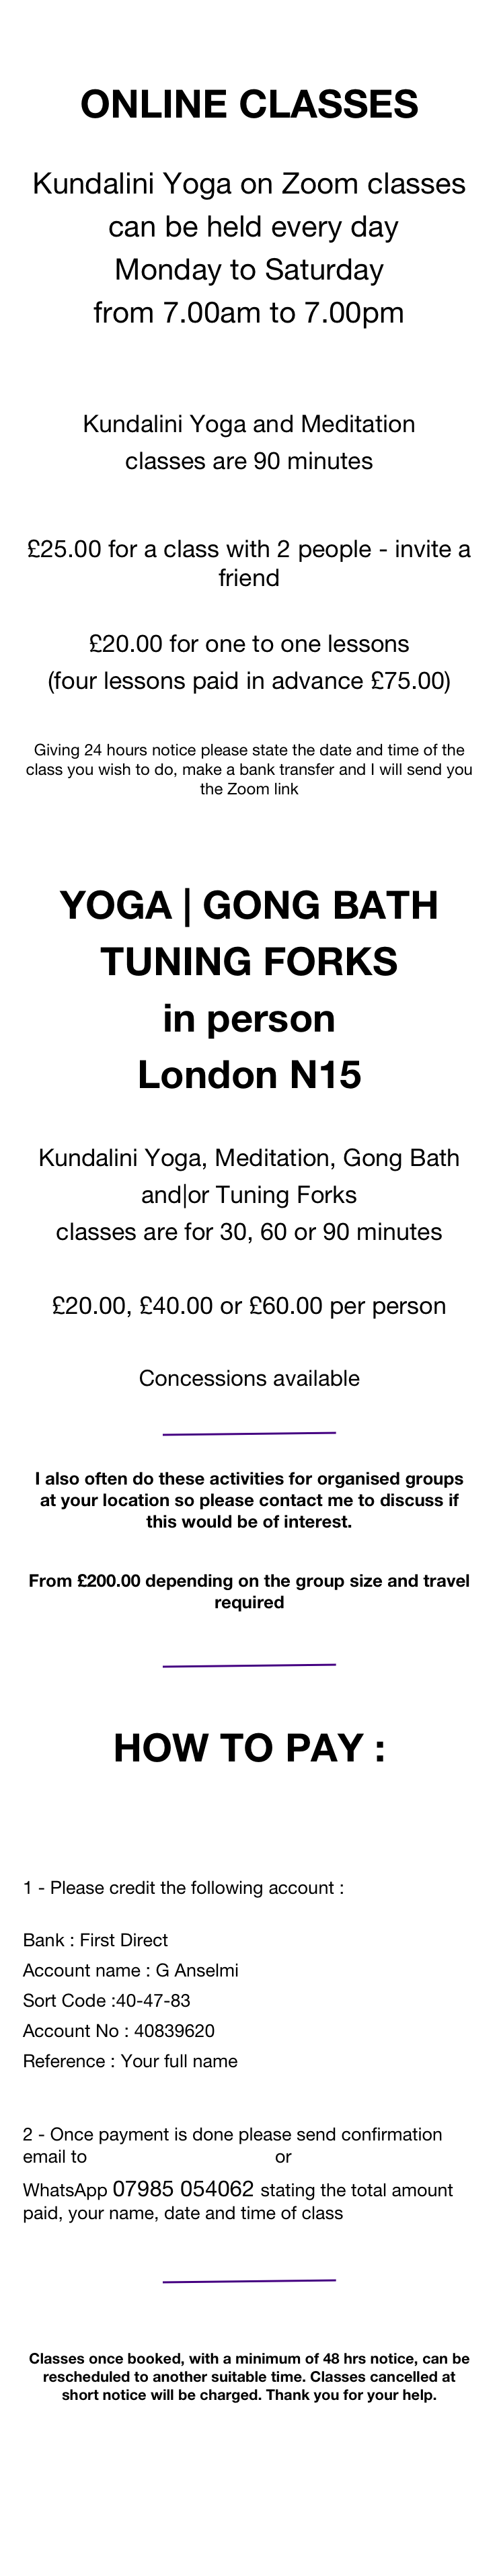 

ONLINE CLASSES :

Kundalini Yoga on Zoom classes
 can be held every day 
Monday to Saturday
from 8 am to 7 pm 

Kundalini Yoga and Meditation
classes are from 30 to 90 minutes
 
£12 per person in a group 
(four lessons £45)
 £15 for one 2 one lessons
(four lessons £55)


KY CLASSES and
GONG BATH
one 2 one in a studio :

Kundalini Yoga Meditation & Gong Bath
classes are from 30 to 90 minutes

£20 per person (four lessons £75)

Concessions available 
WhatsApp 079.8505.4062 Siri Atma


Giving 24 hours notice please state the date and time of the class you wish to do, make a bank transfer and we will send you the Zoom link
 
￼
  
HOW TO PAY :



1 - Please credit the following account : 
Bank : First Direct
Account name : G Anselmi
Sort Code :40-47-83
Account No : 40839620
Reference : Your full name  
2 - Once payment is done please send confirmation email to siriatmas@yahoo.com or WhatsApp 079.8505.4062 with following details: 

Total amount paid : £ .............. name : ..................... 
date of class : ............   and time ........  
 
￼


Please : class once booked cannot be cancelled, with minimum of 48 hrs notice can be rescheduled to another suitable time. Can be rescheduled once only. Thank you for your help.
 


